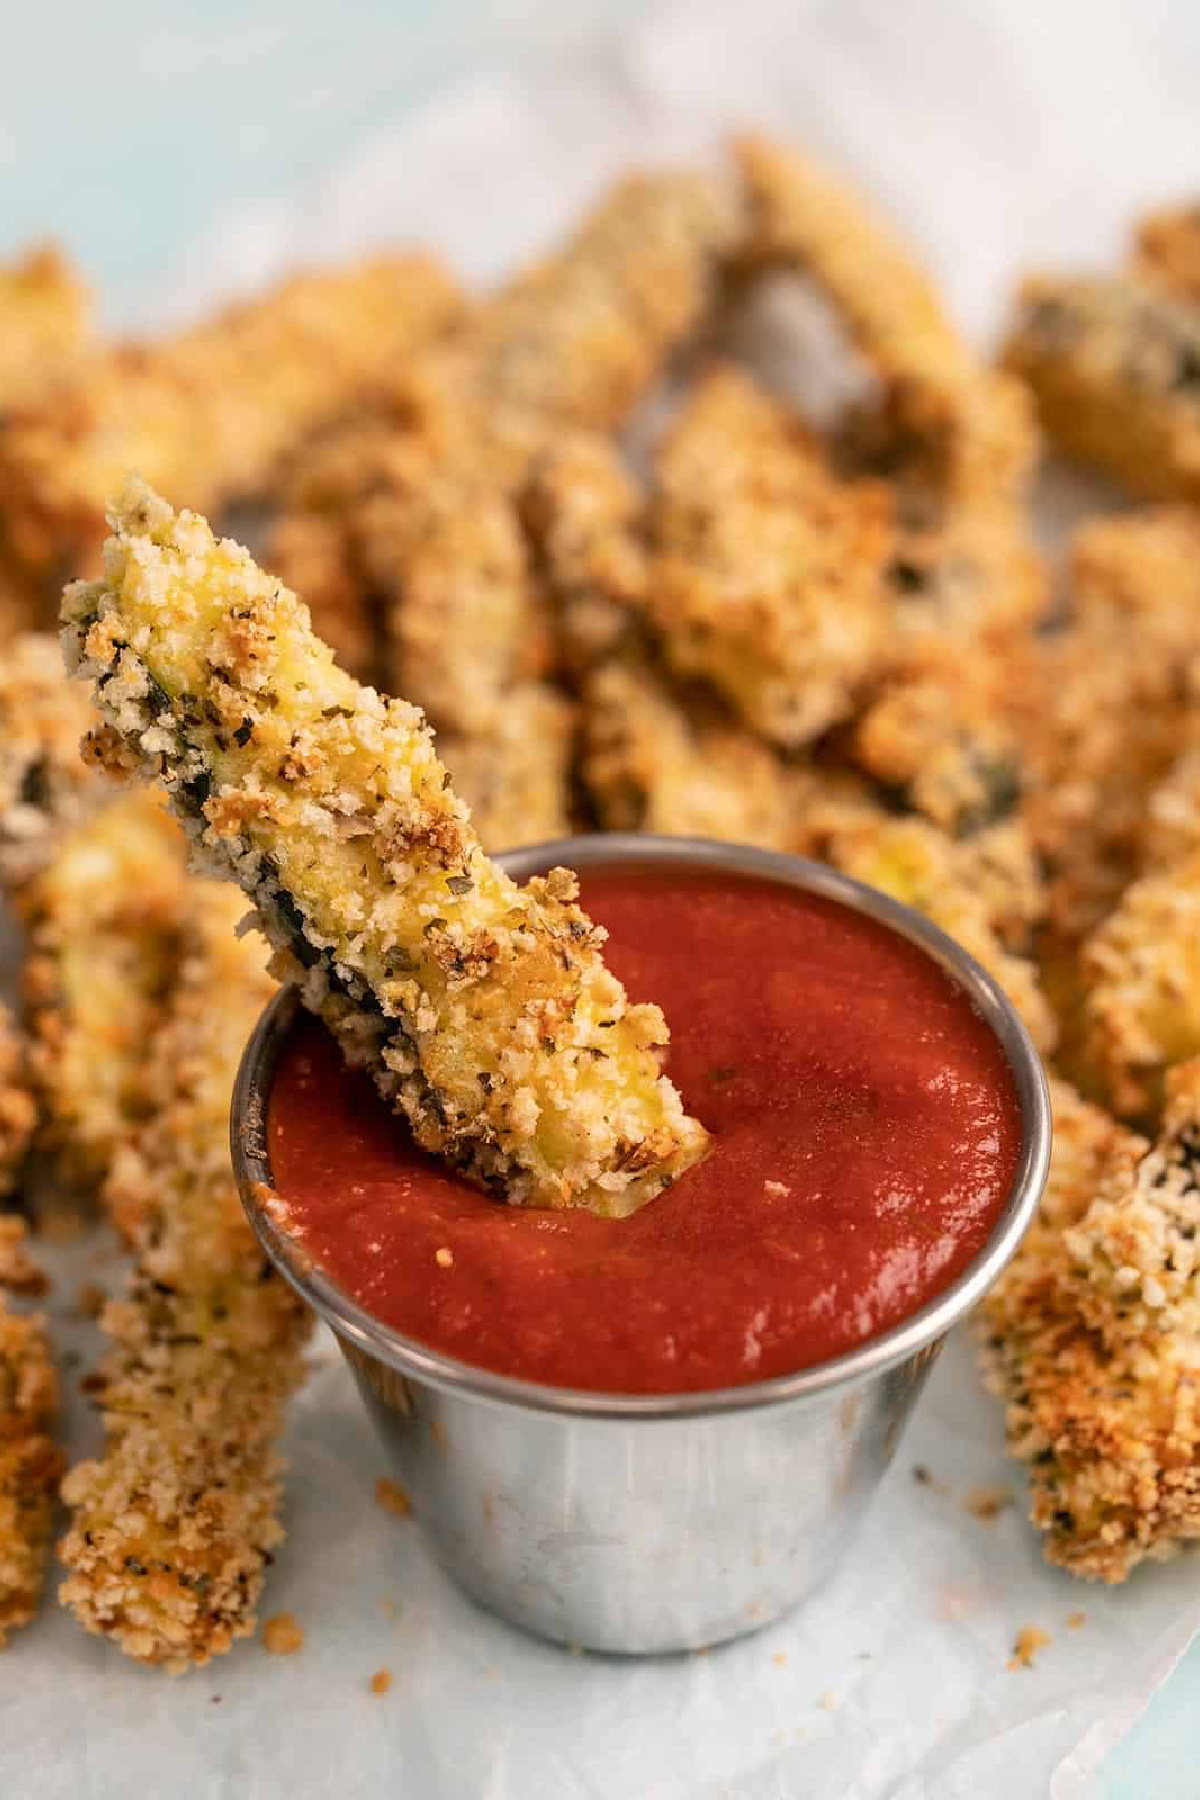 Baked Zucchini Fries - a tasty and cheap party food idea